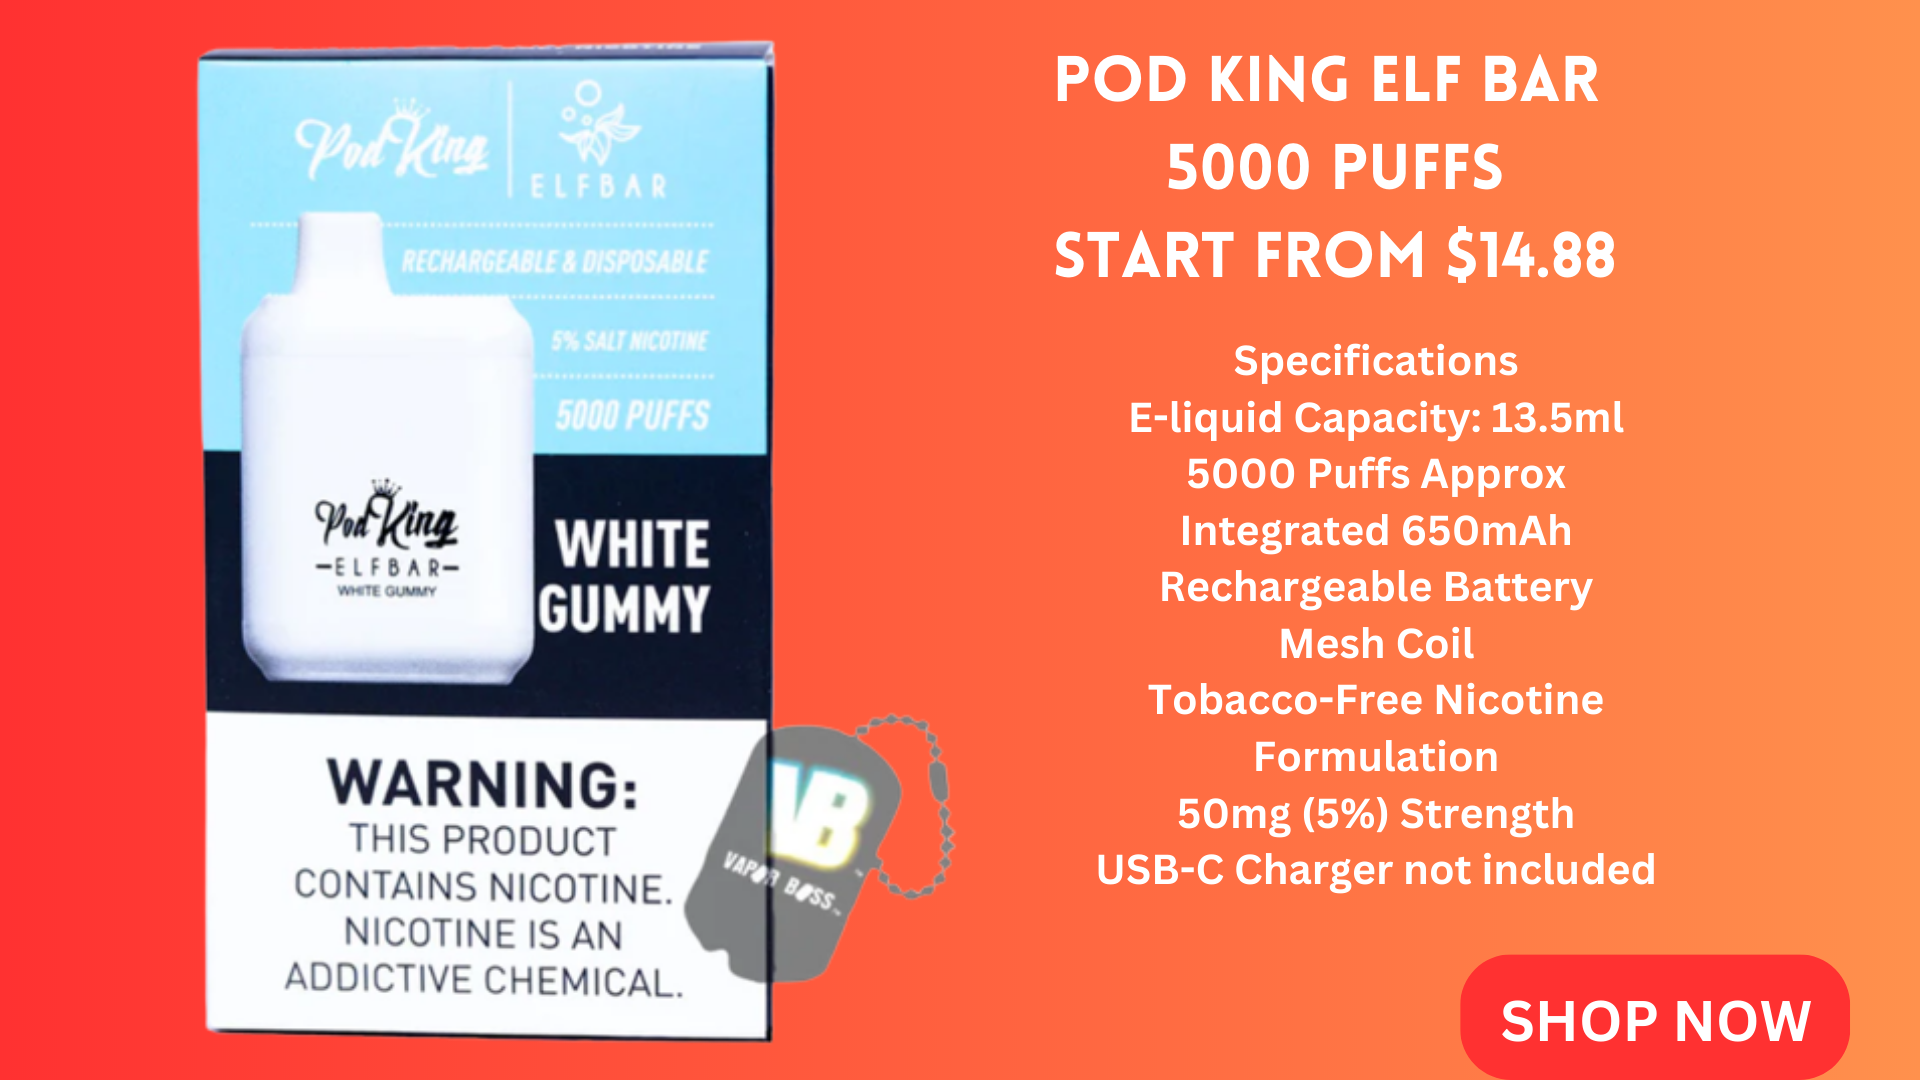 Pod King Elf Bar For You To Live The Best Of Your Life!